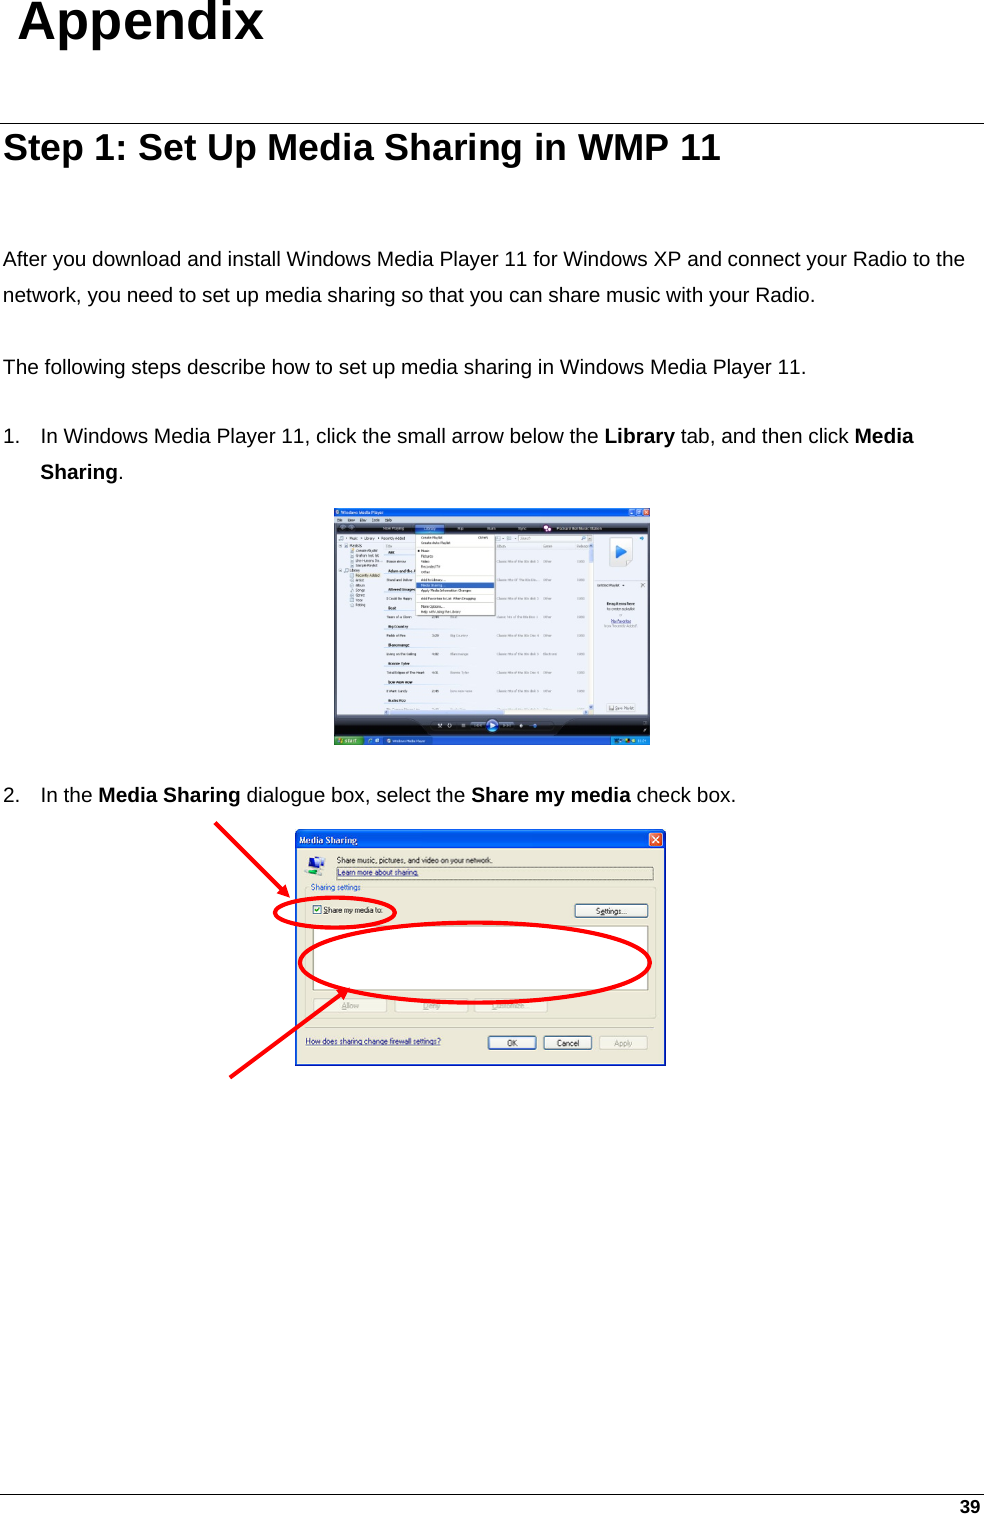 39 Appendix Step 1: Set Up Media Sharing in WMP 11   After you download and install Windows Media Player 11 for Windows XP and connect your Radio to the network, you need to set up media sharing so that you can share music with your Radio.   The following steps describe how to set up media sharing in Windows Media Player 11.  1.  In Windows Media Player 11, click the small arrow below the Library tab, and then click Media Sharing.         2. In the Media Sharing dialogue box, select the Share my media check box. 